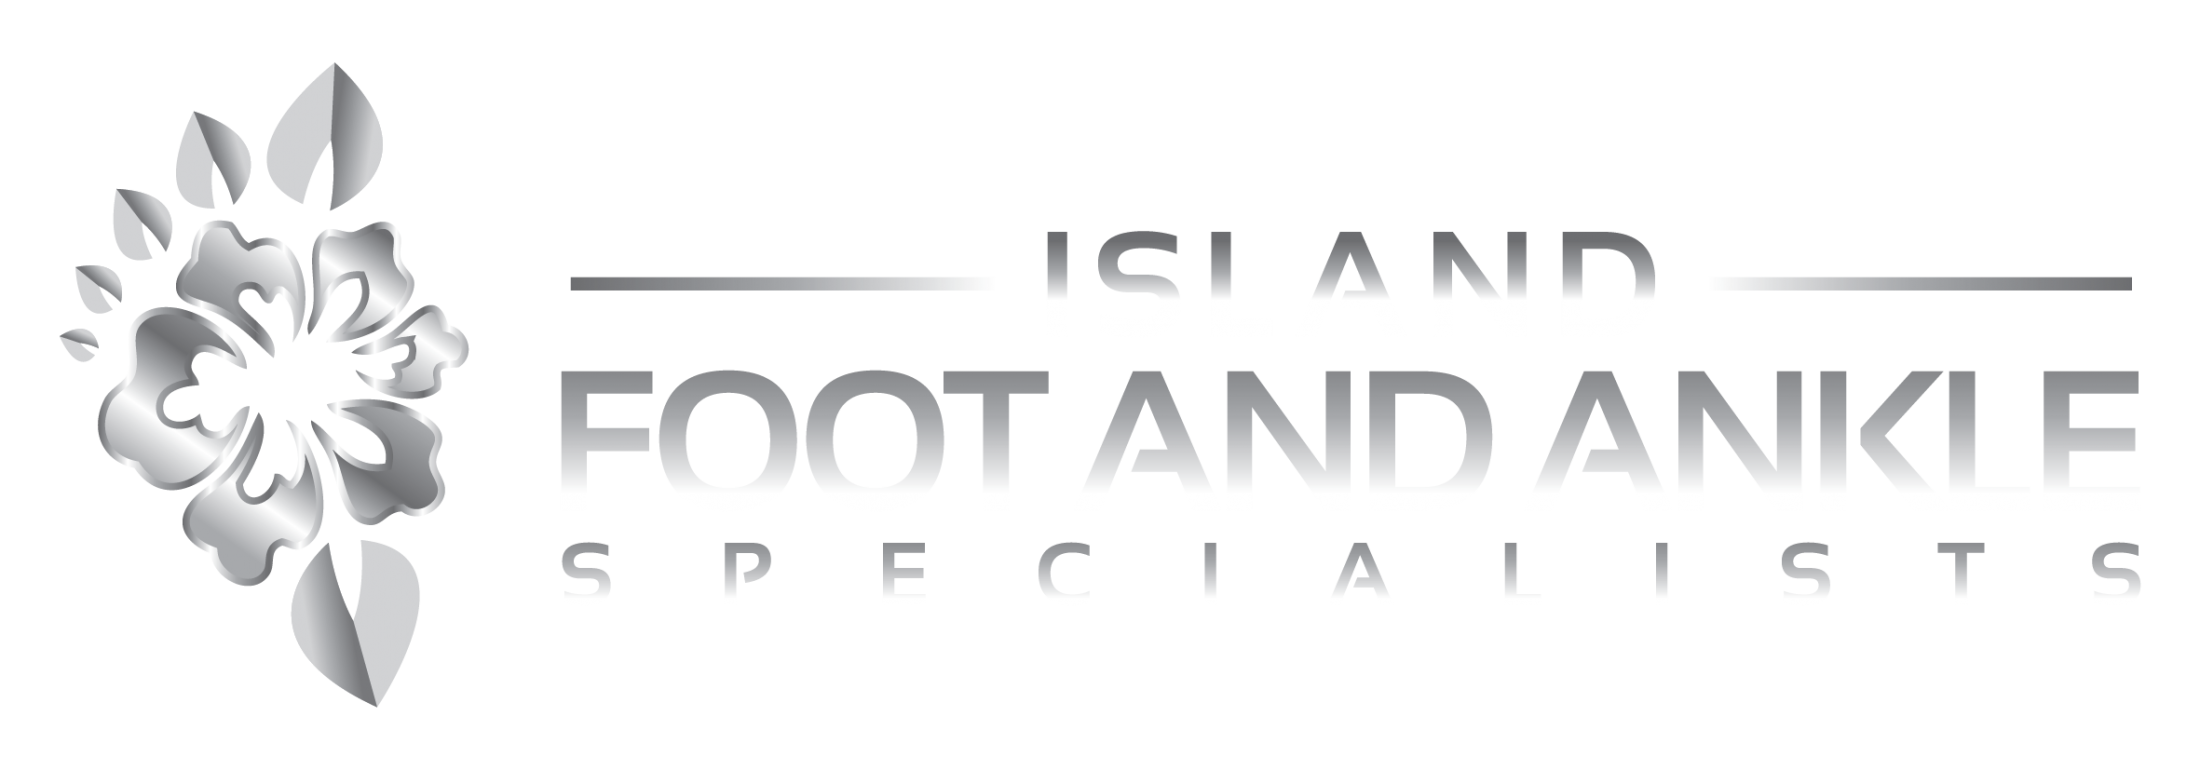 Island Foot and Ankle Specialists